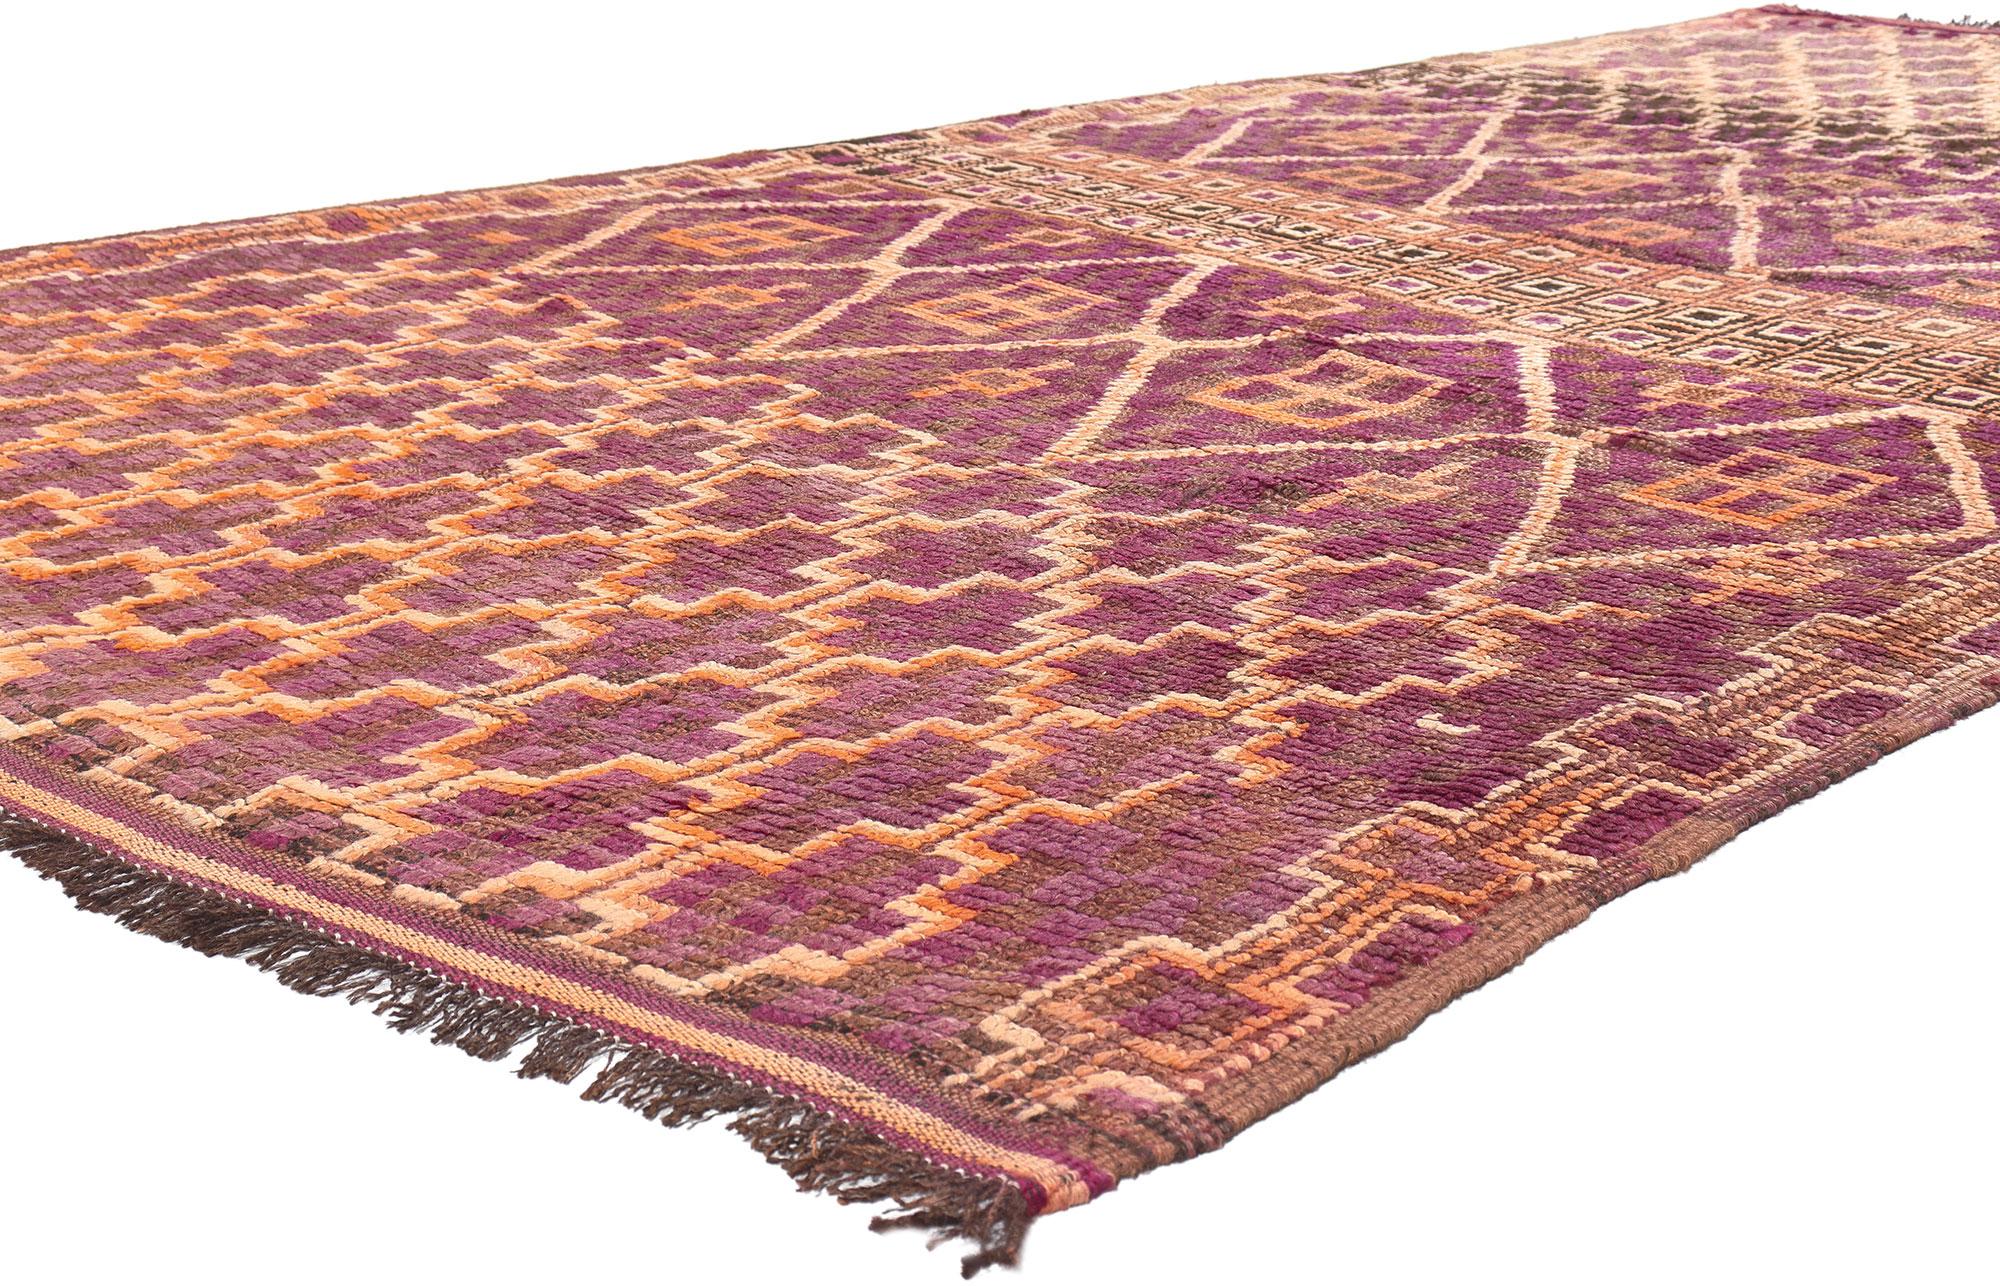 20917 Vintage Purple Beni MGuild Moroccan Rug, 06'01 x 13'01. Woven with the enchanting expertise of Berber women from the Ait M'Guild tribe in the mystical Atlas Mountains of Morocco, Beni Mguild rugs are revered for their masterful craftsmanship